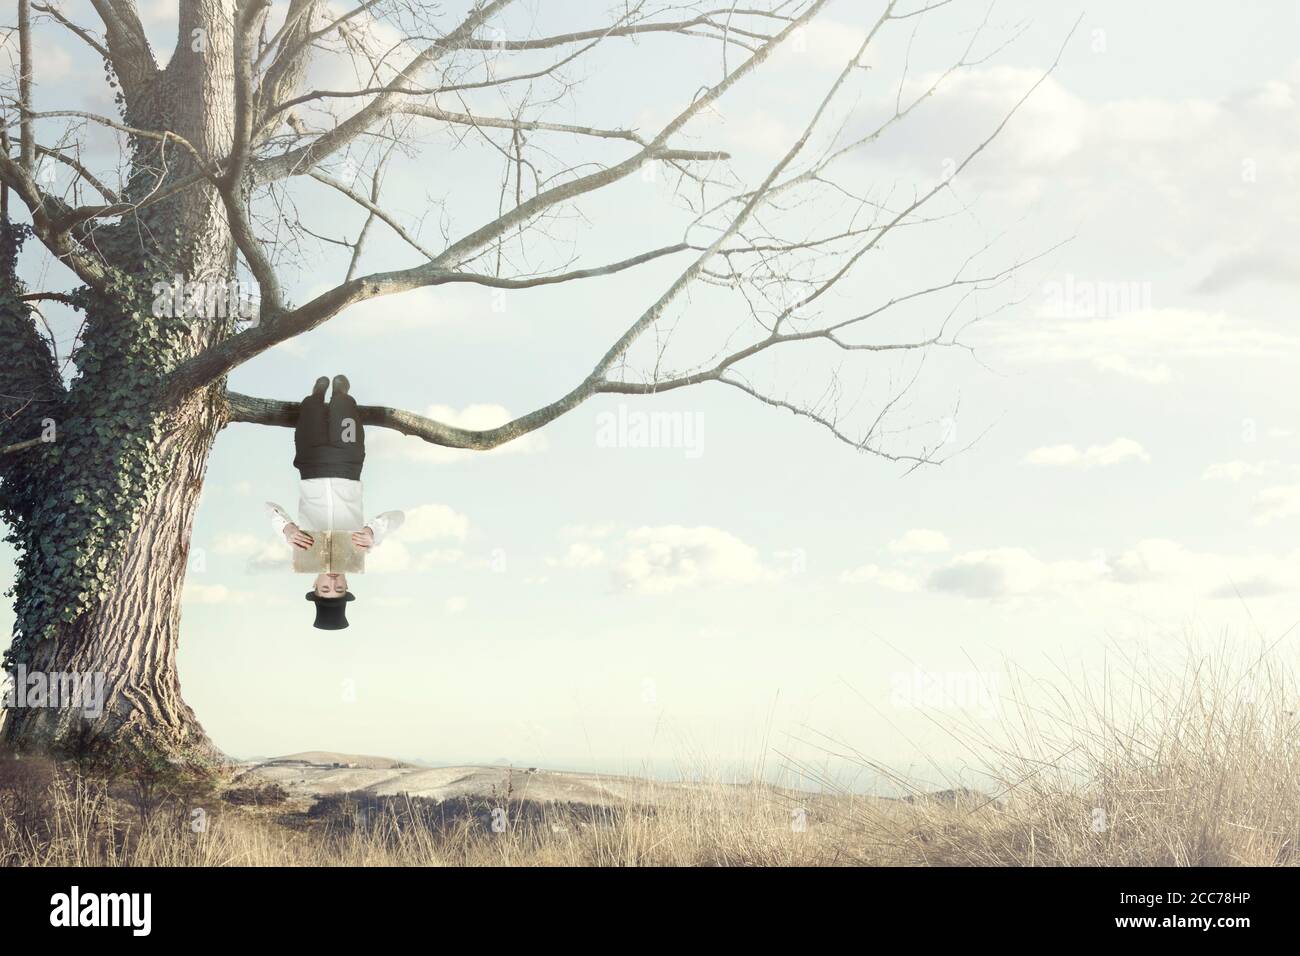 surreal moment of man reading a book hanging from a branch on  head down Stock Photo